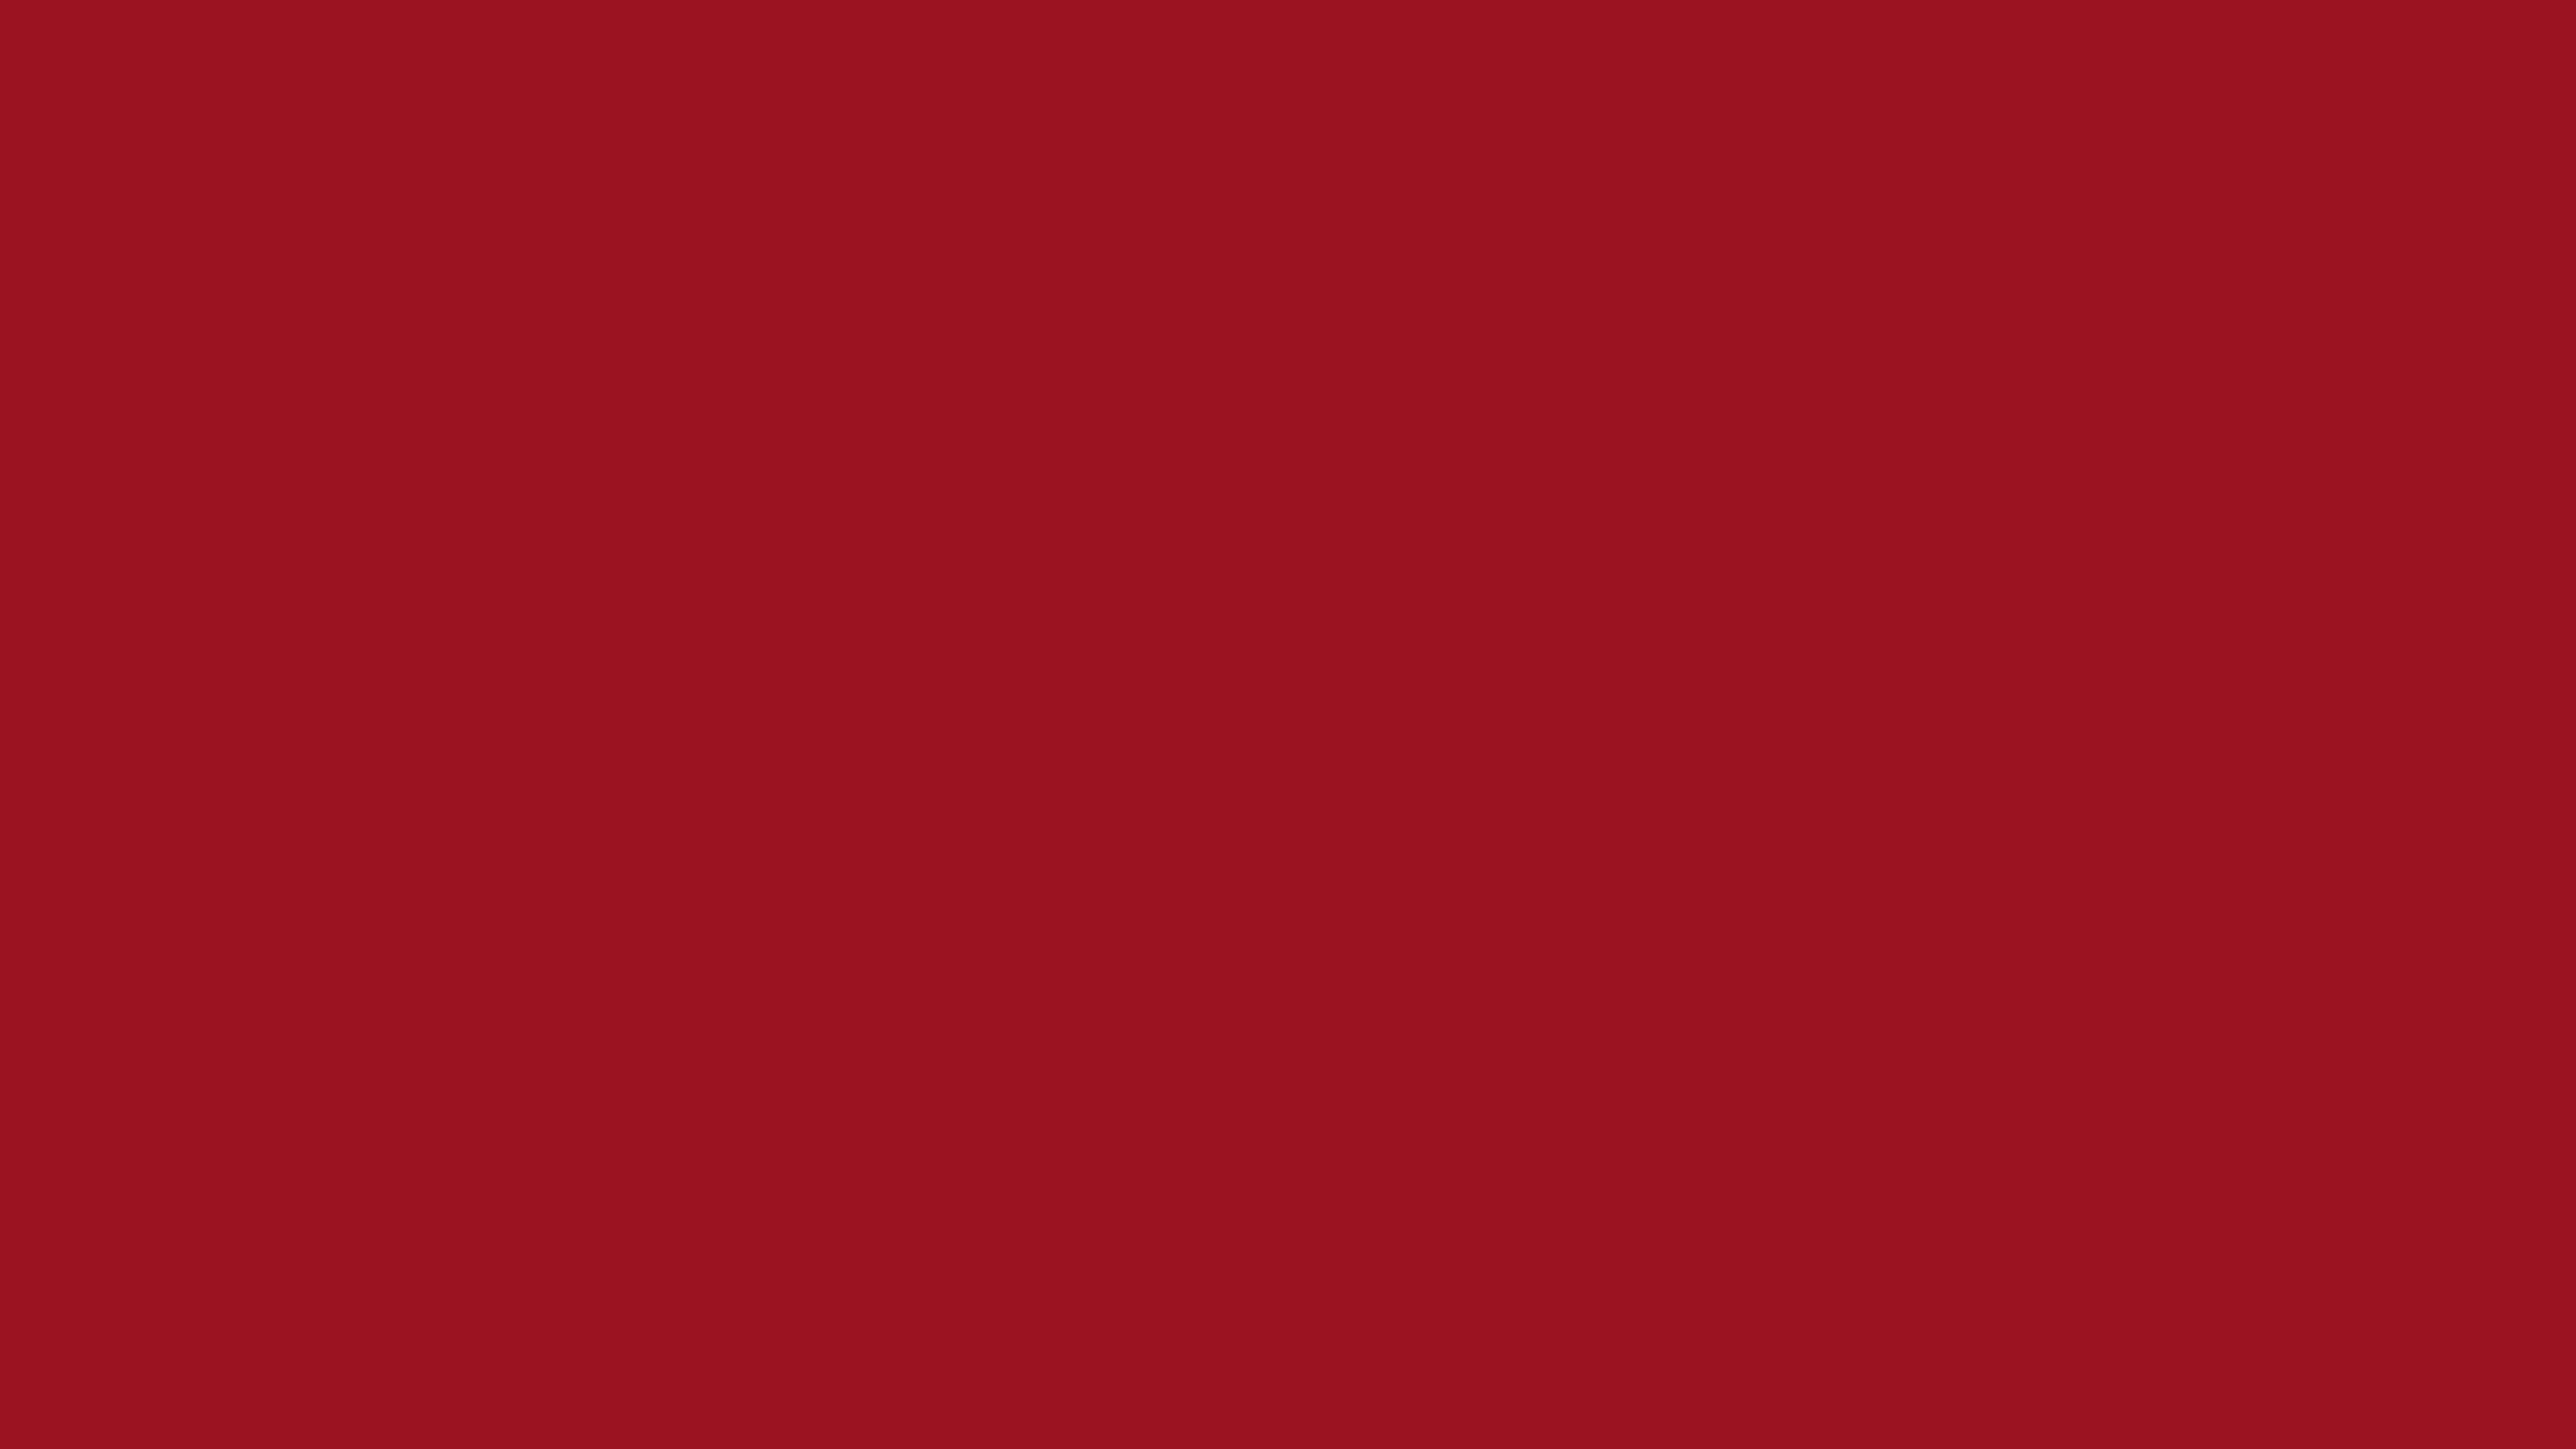 4096x2304 Ruby Red Solid Color Background